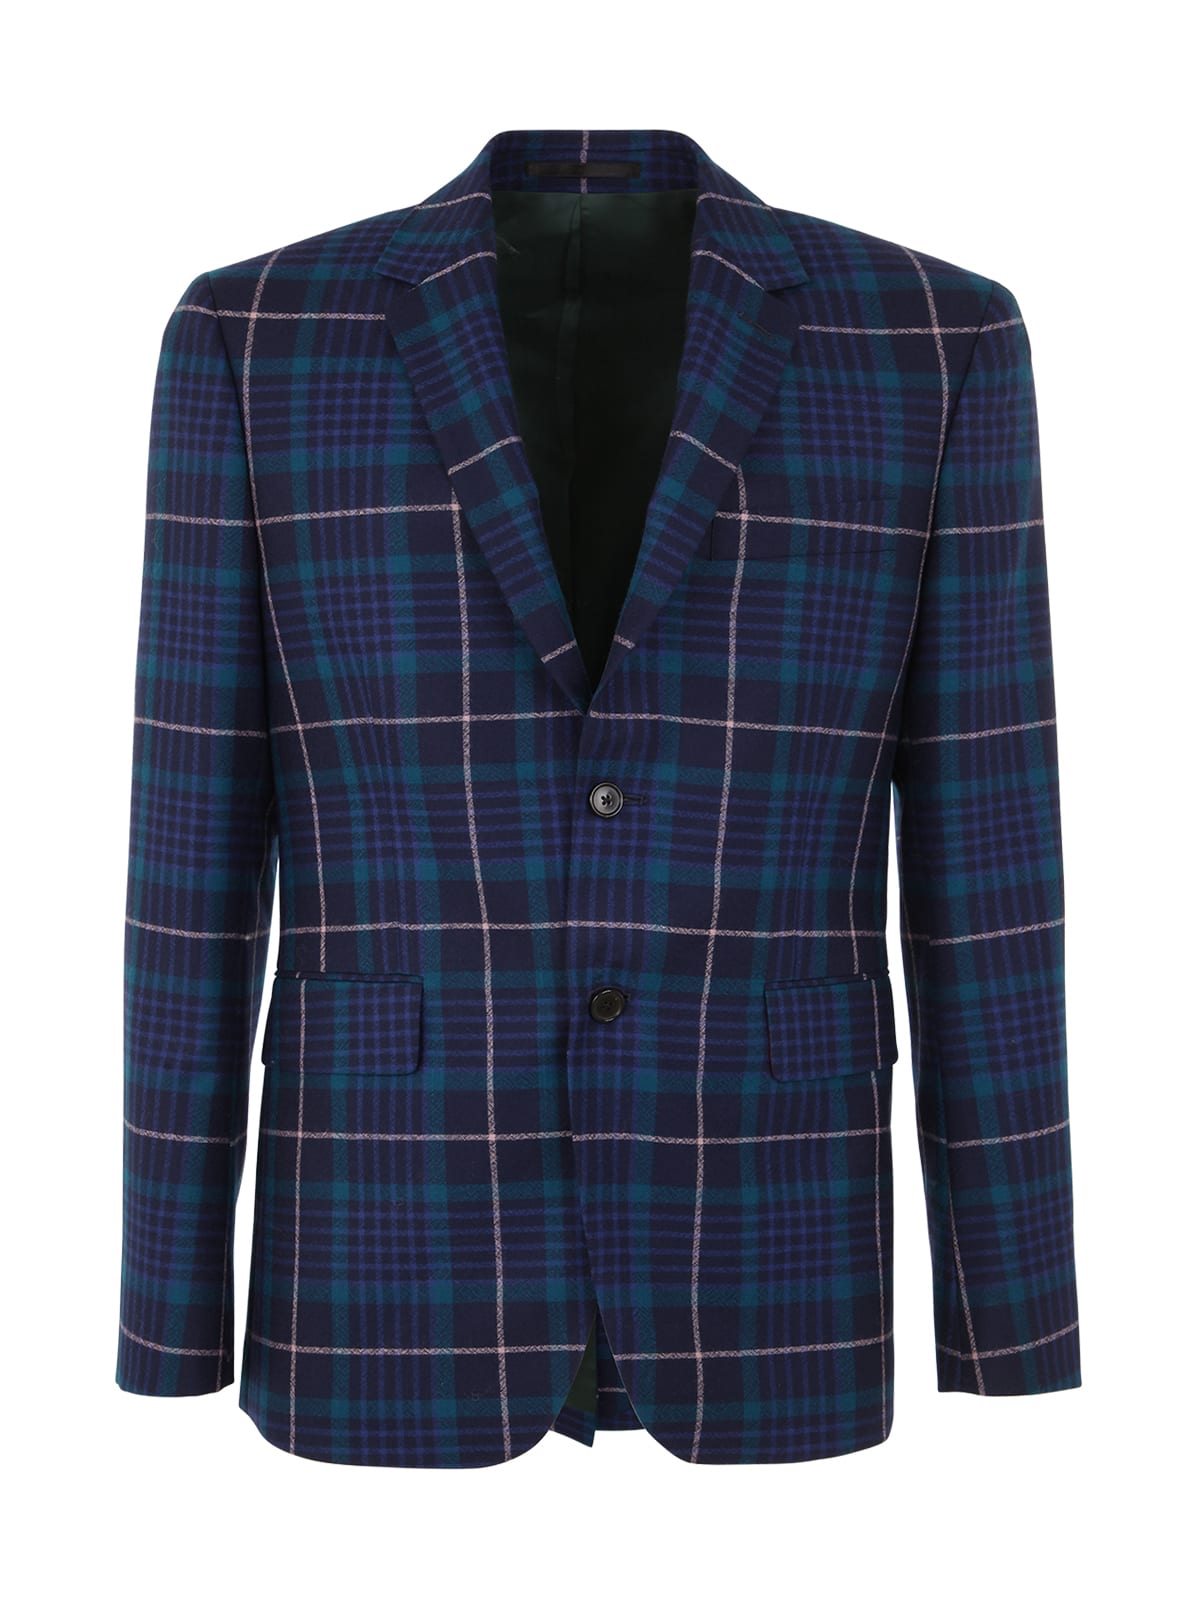 Paul Smith Gents 2 Button Jacket